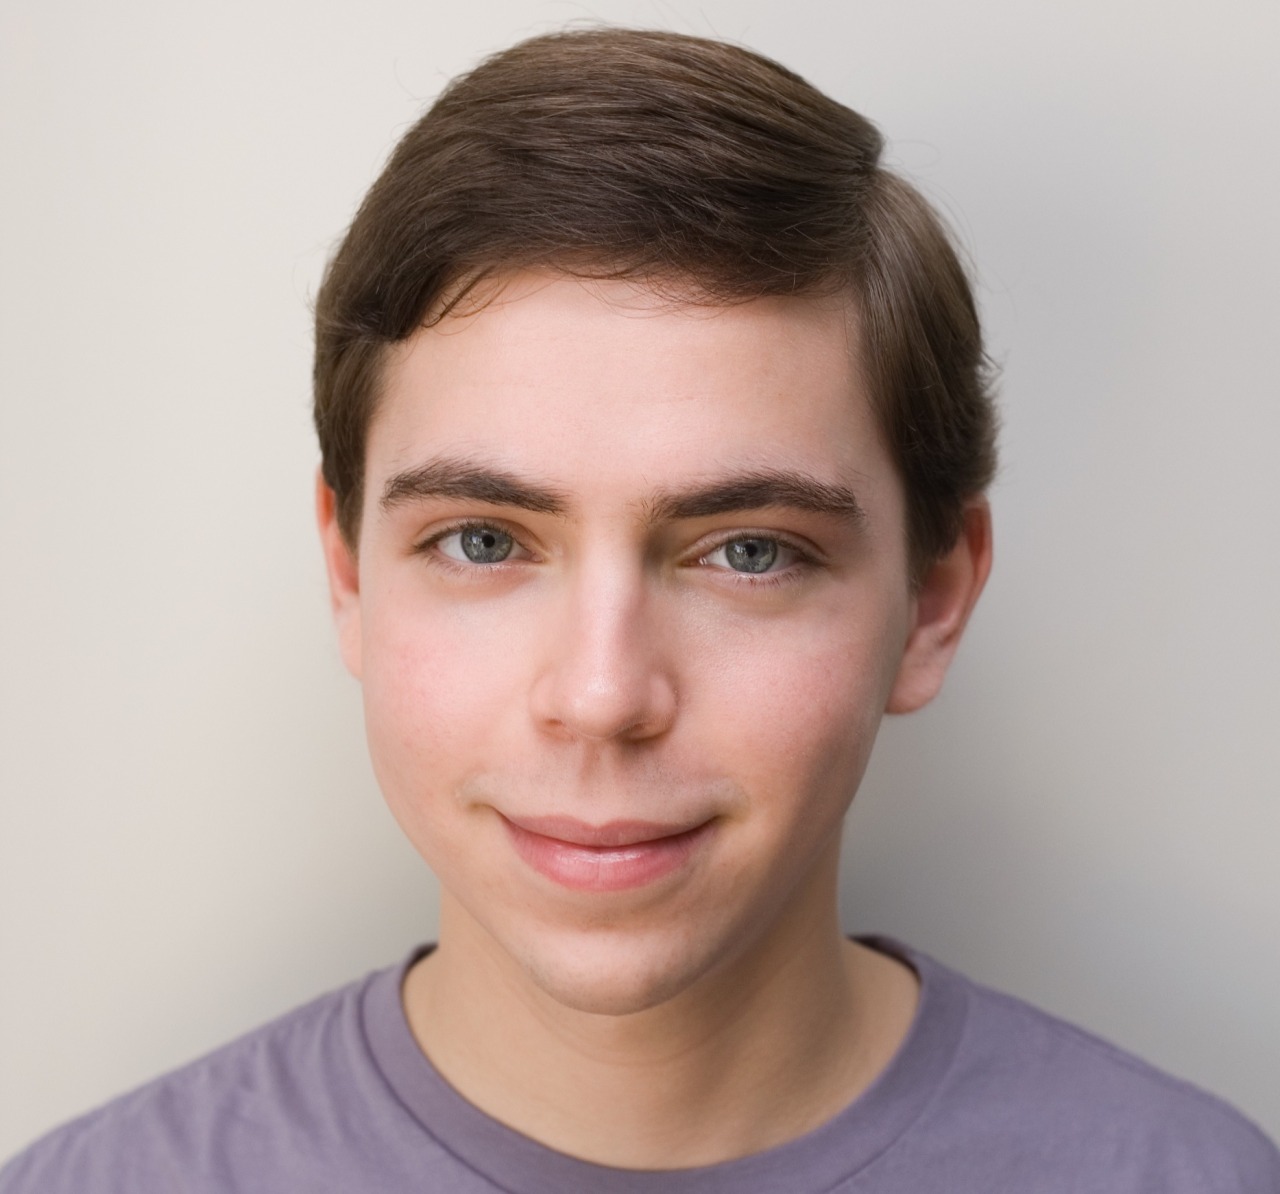 Tumblr Summer Intern: Jared Stern
Working at Tumblr as a summer engineering intern, I was flung headfirst into a mysterious world replete with terms I did not understand, people I did not know, and a codebase that defied all attempts at...